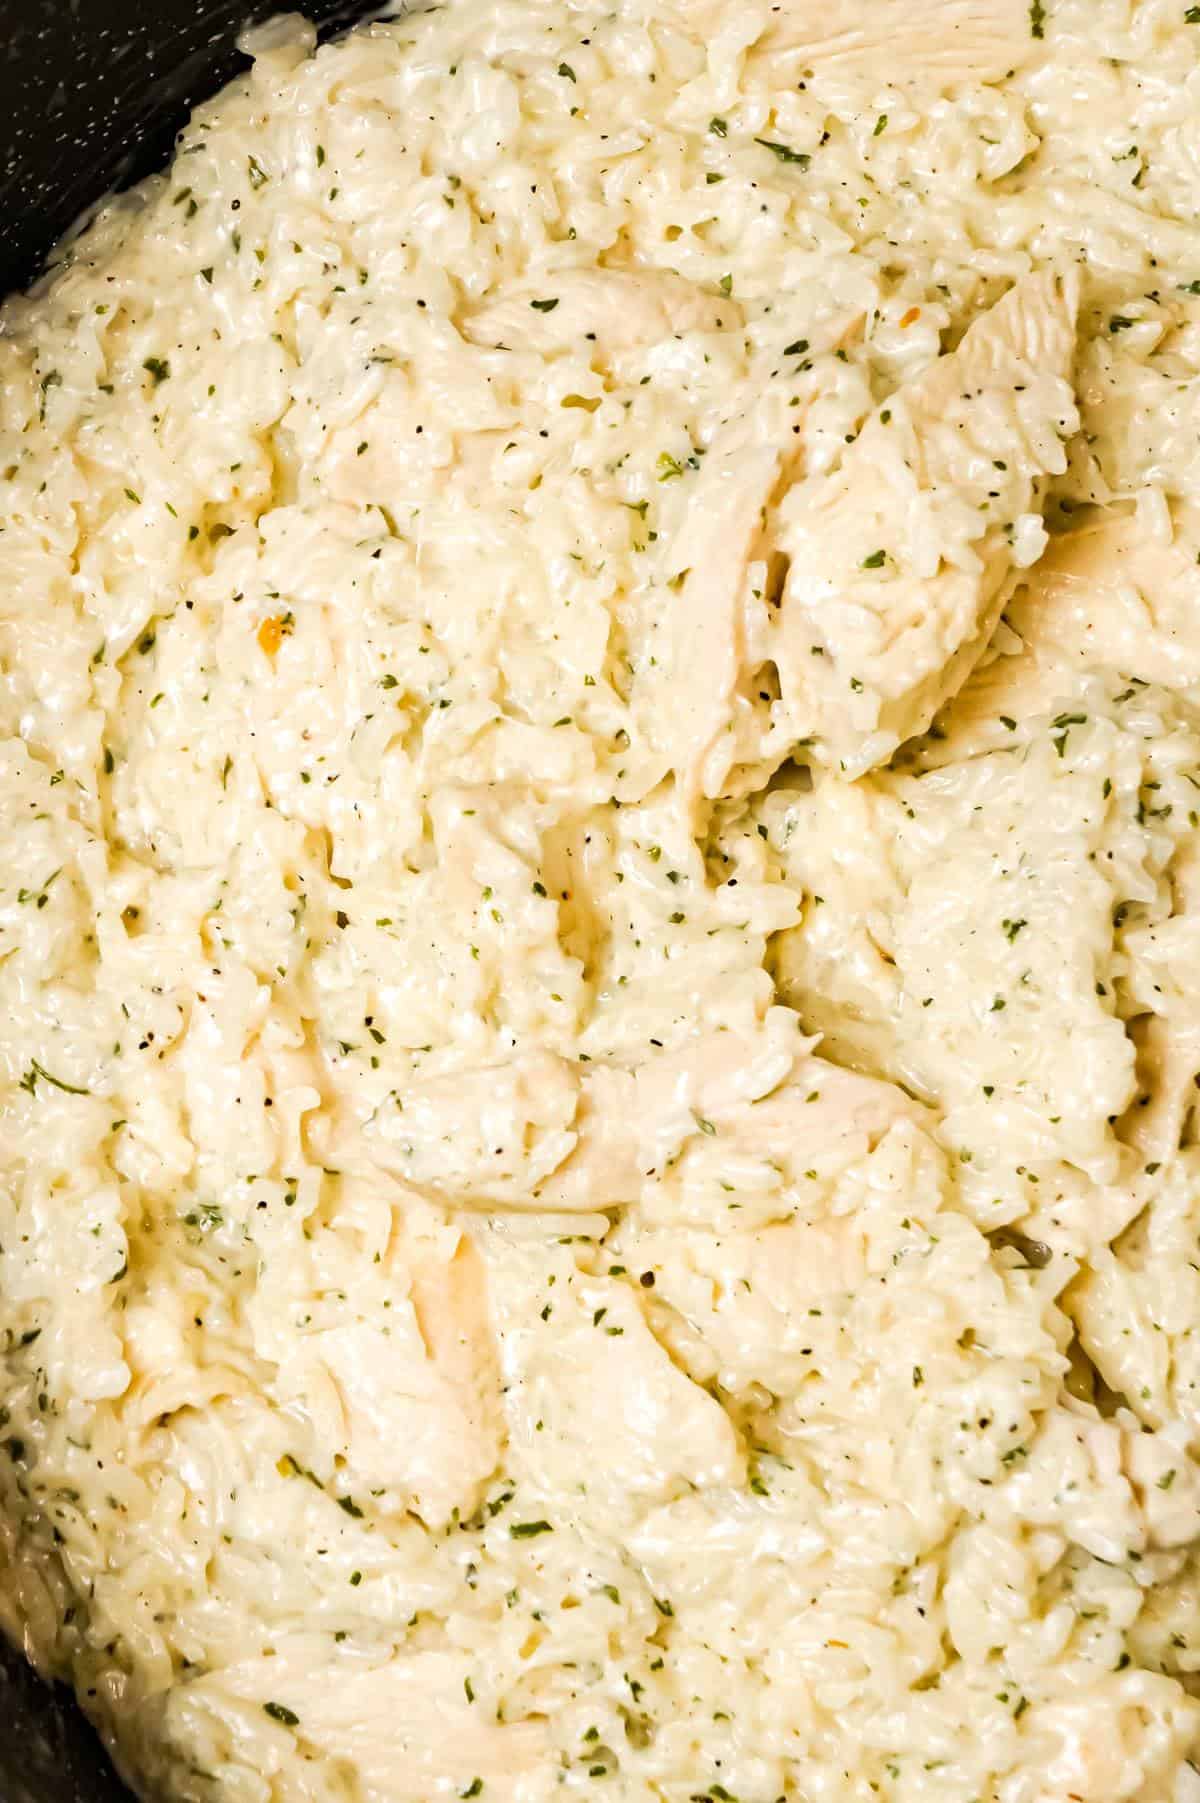 One Pot Garlic Parmesan Chicken and Rice is an easy weeknight dinner recipe made with boneless, skinless chicken breasts, Minute rice, garlic puree, cream and Parmesan cheese.